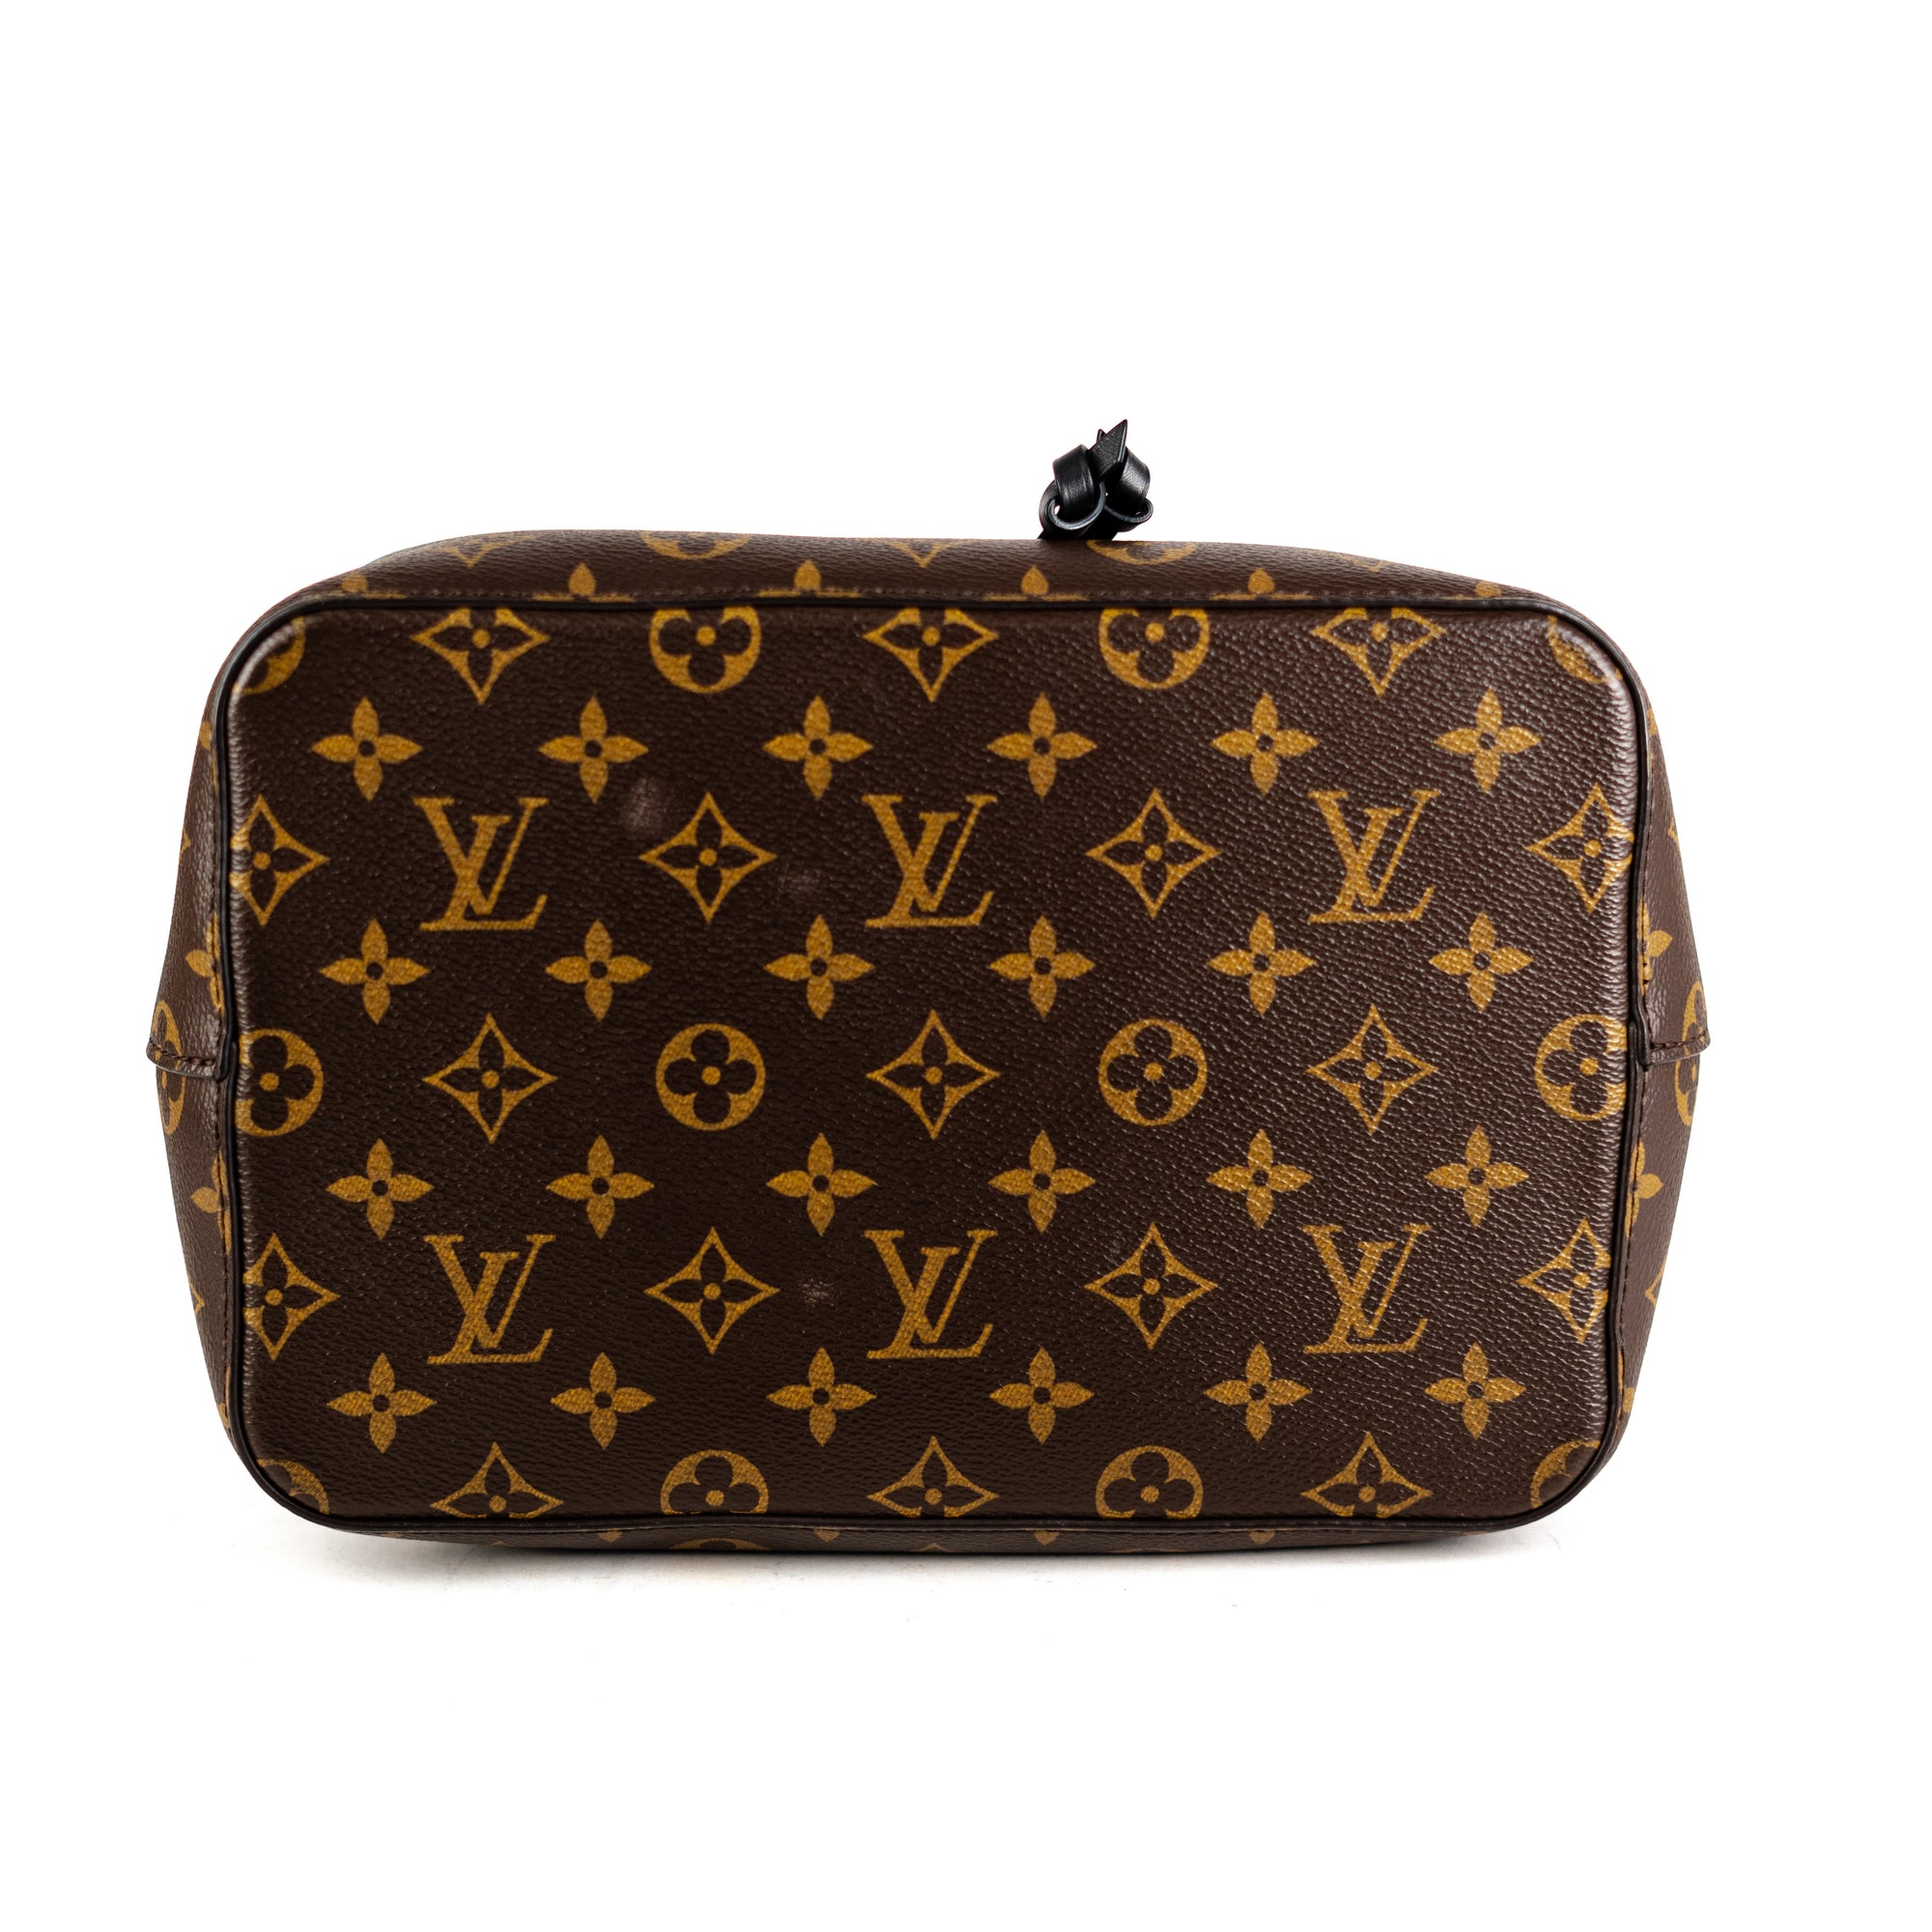 Louis Vuitton Neo Noe Monogram with additional strap - THE PURSE AFFAIR